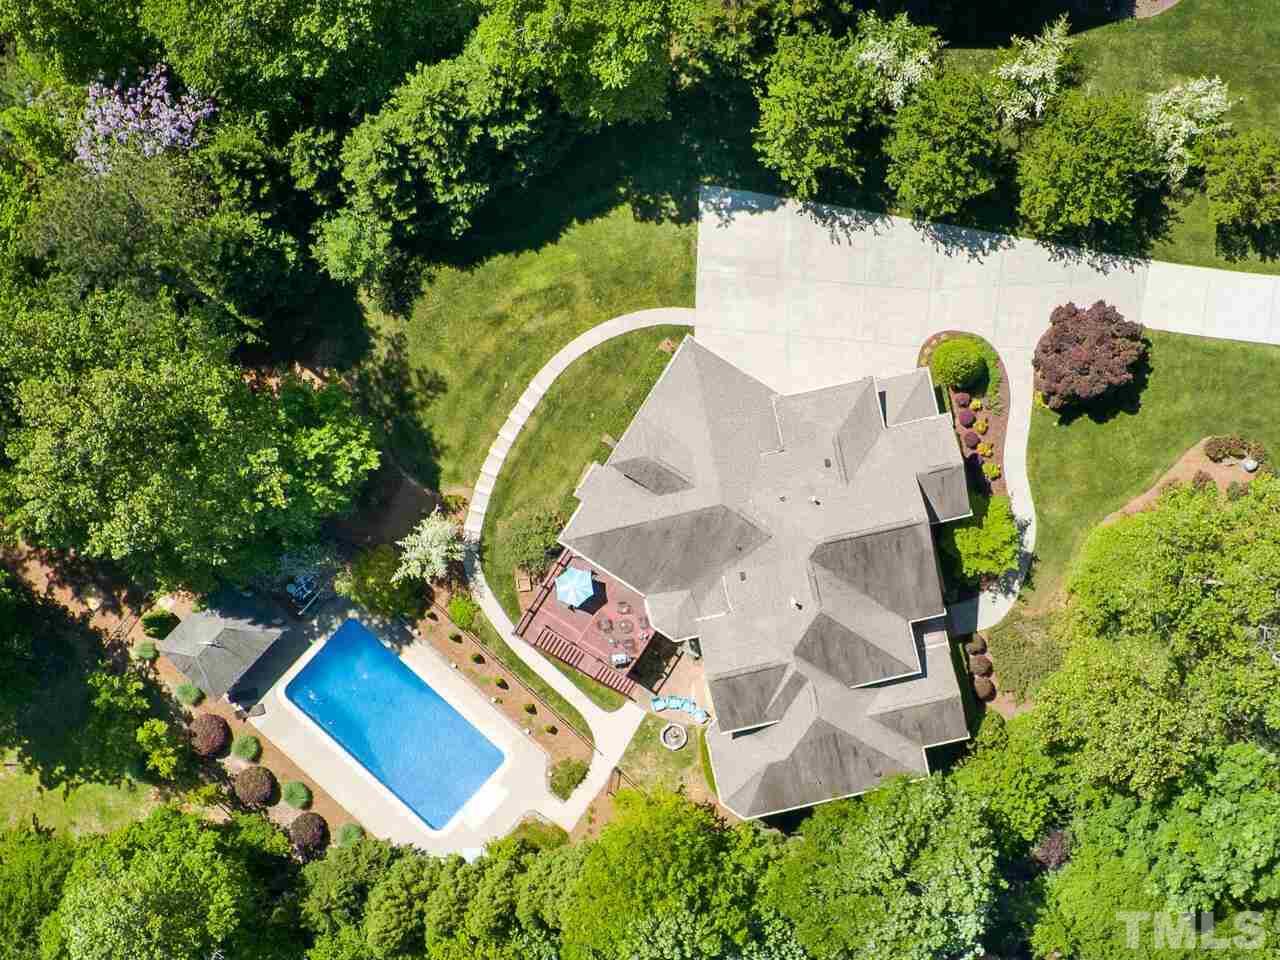 an aerial view of a house with outdoor space and tennis court